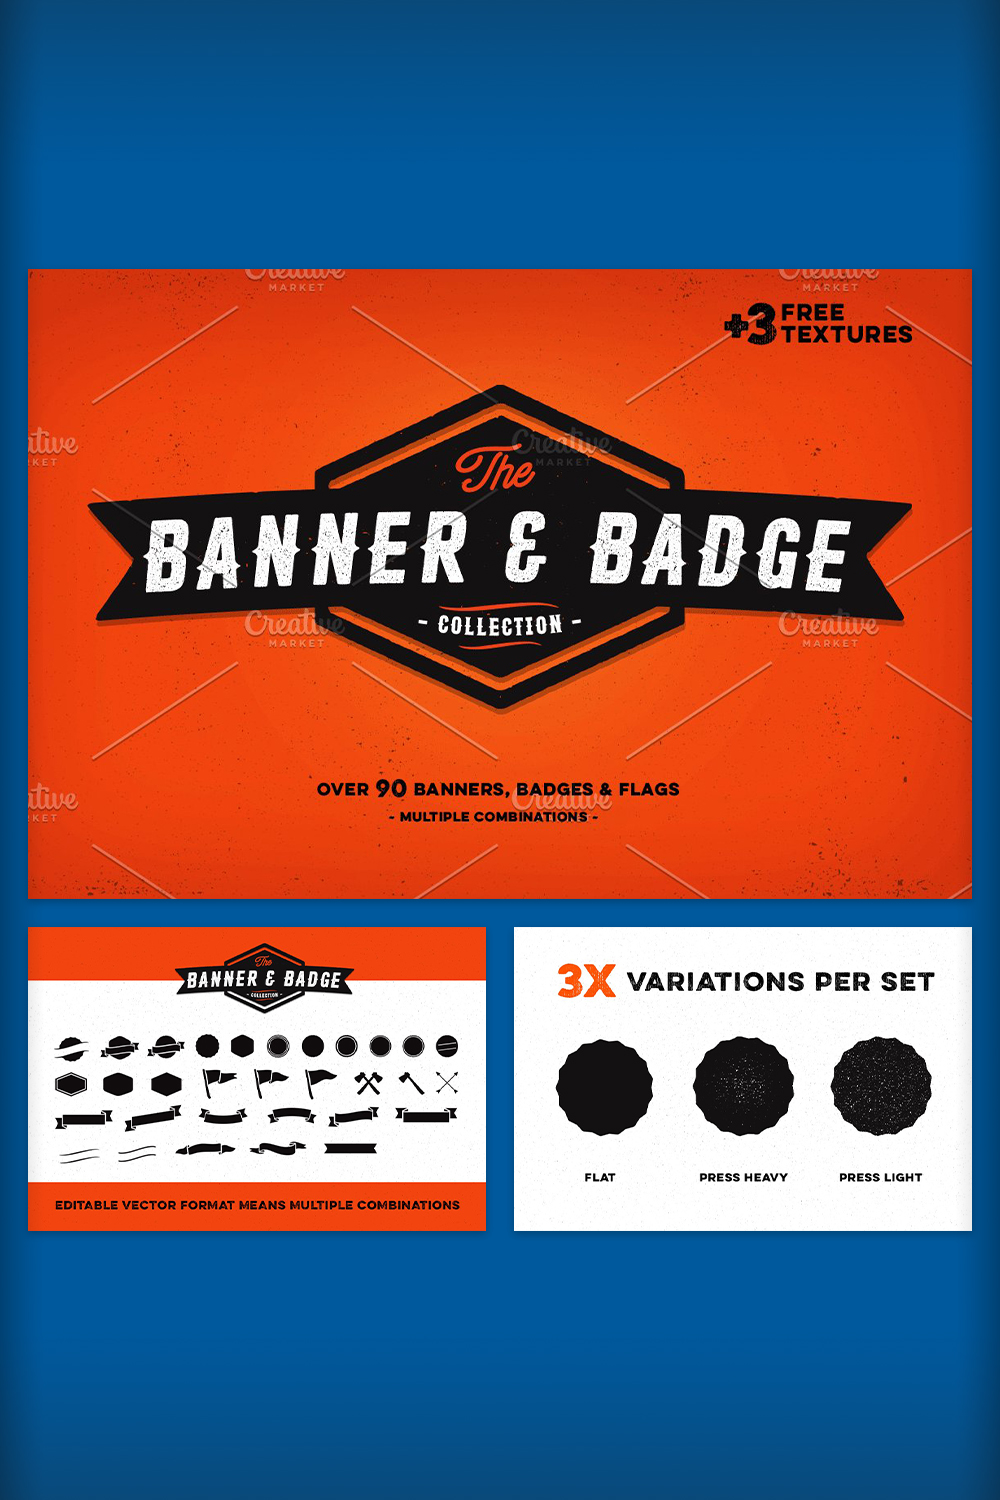 Banner Badge Collection Pinterest image.